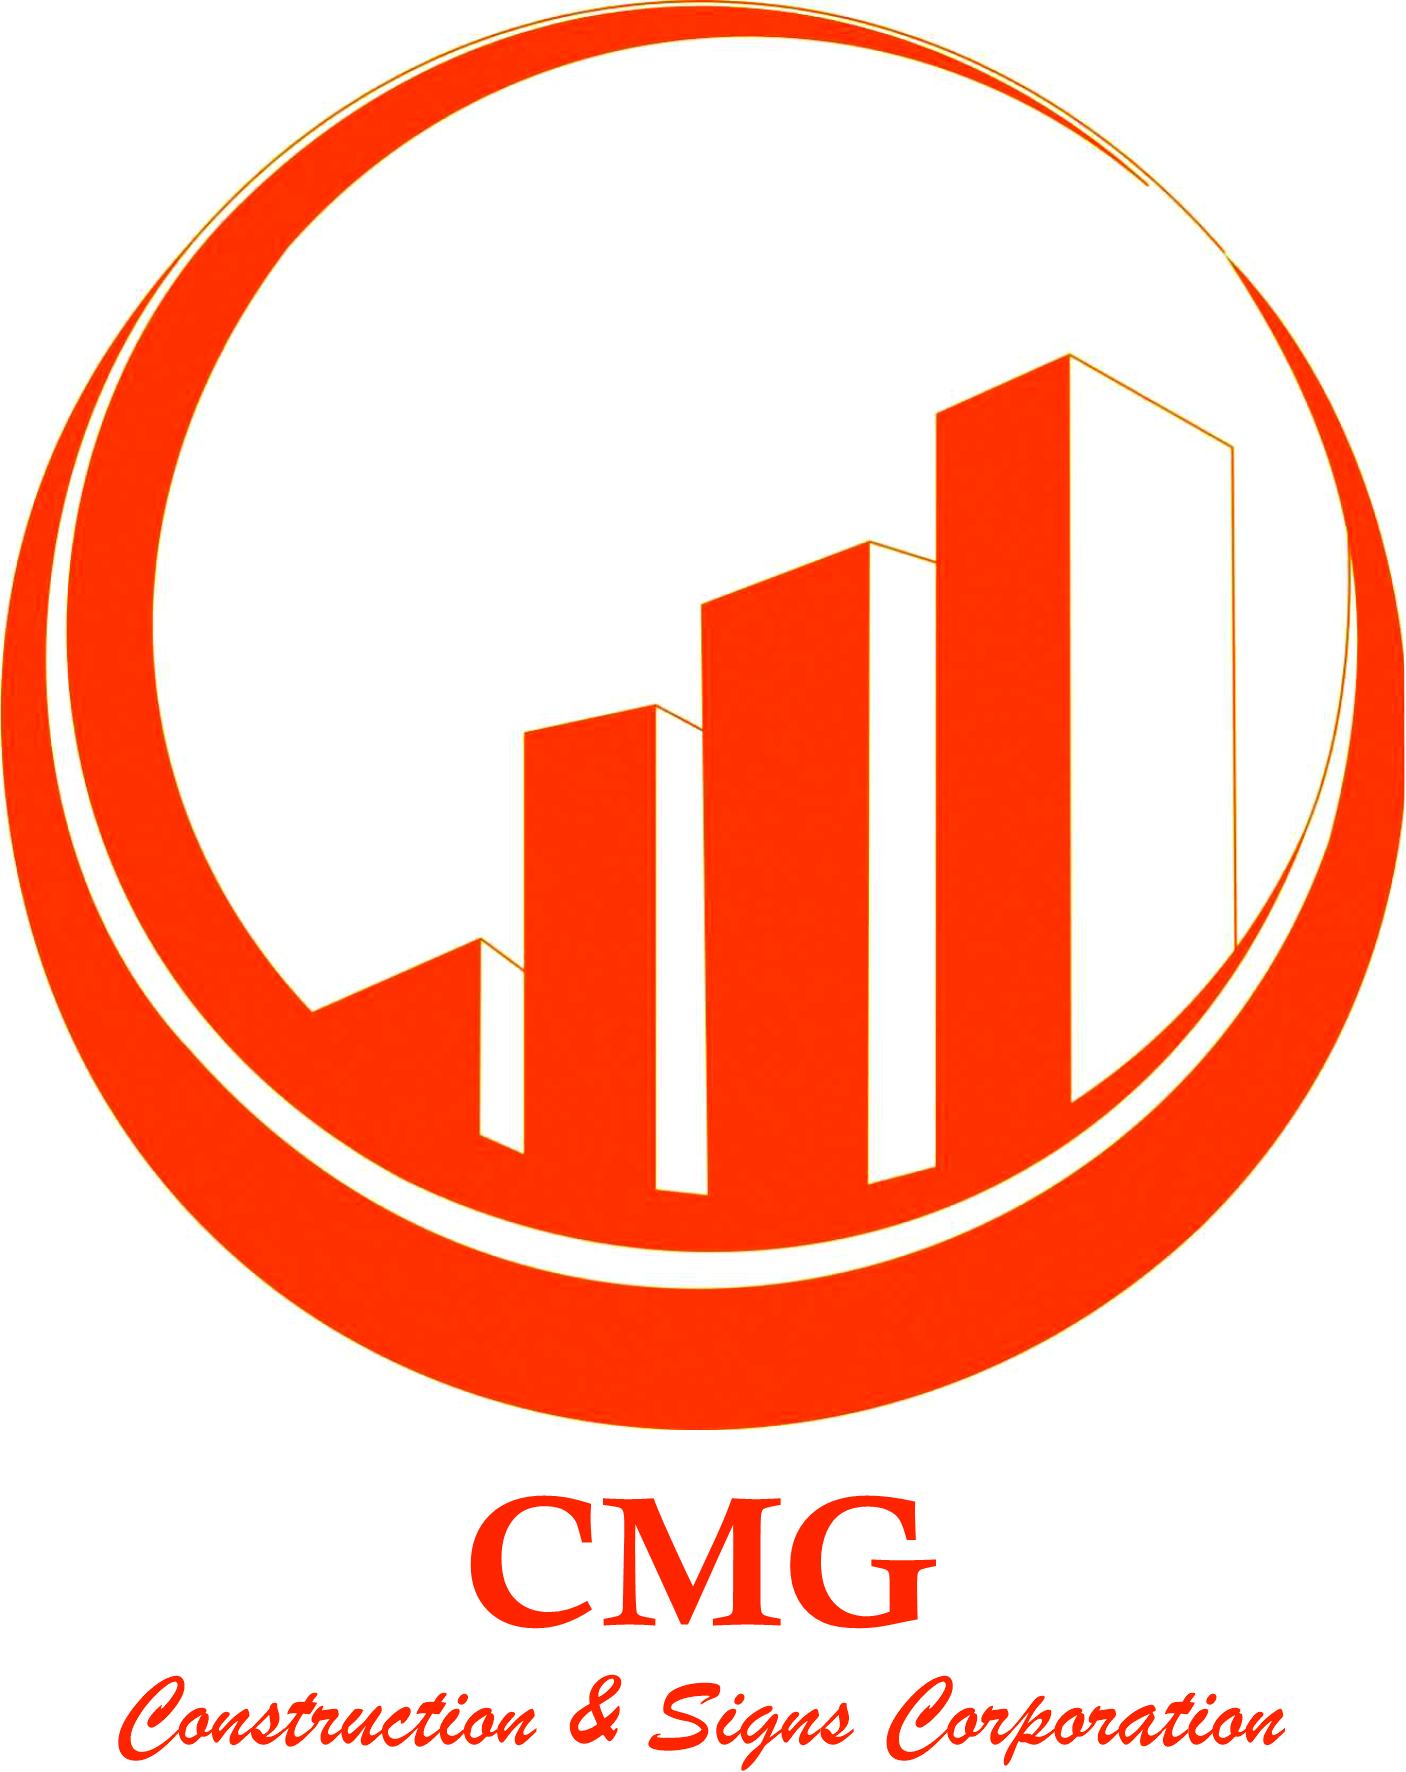 CMG CONSTRUCTION AND SIGNS CORPORATION